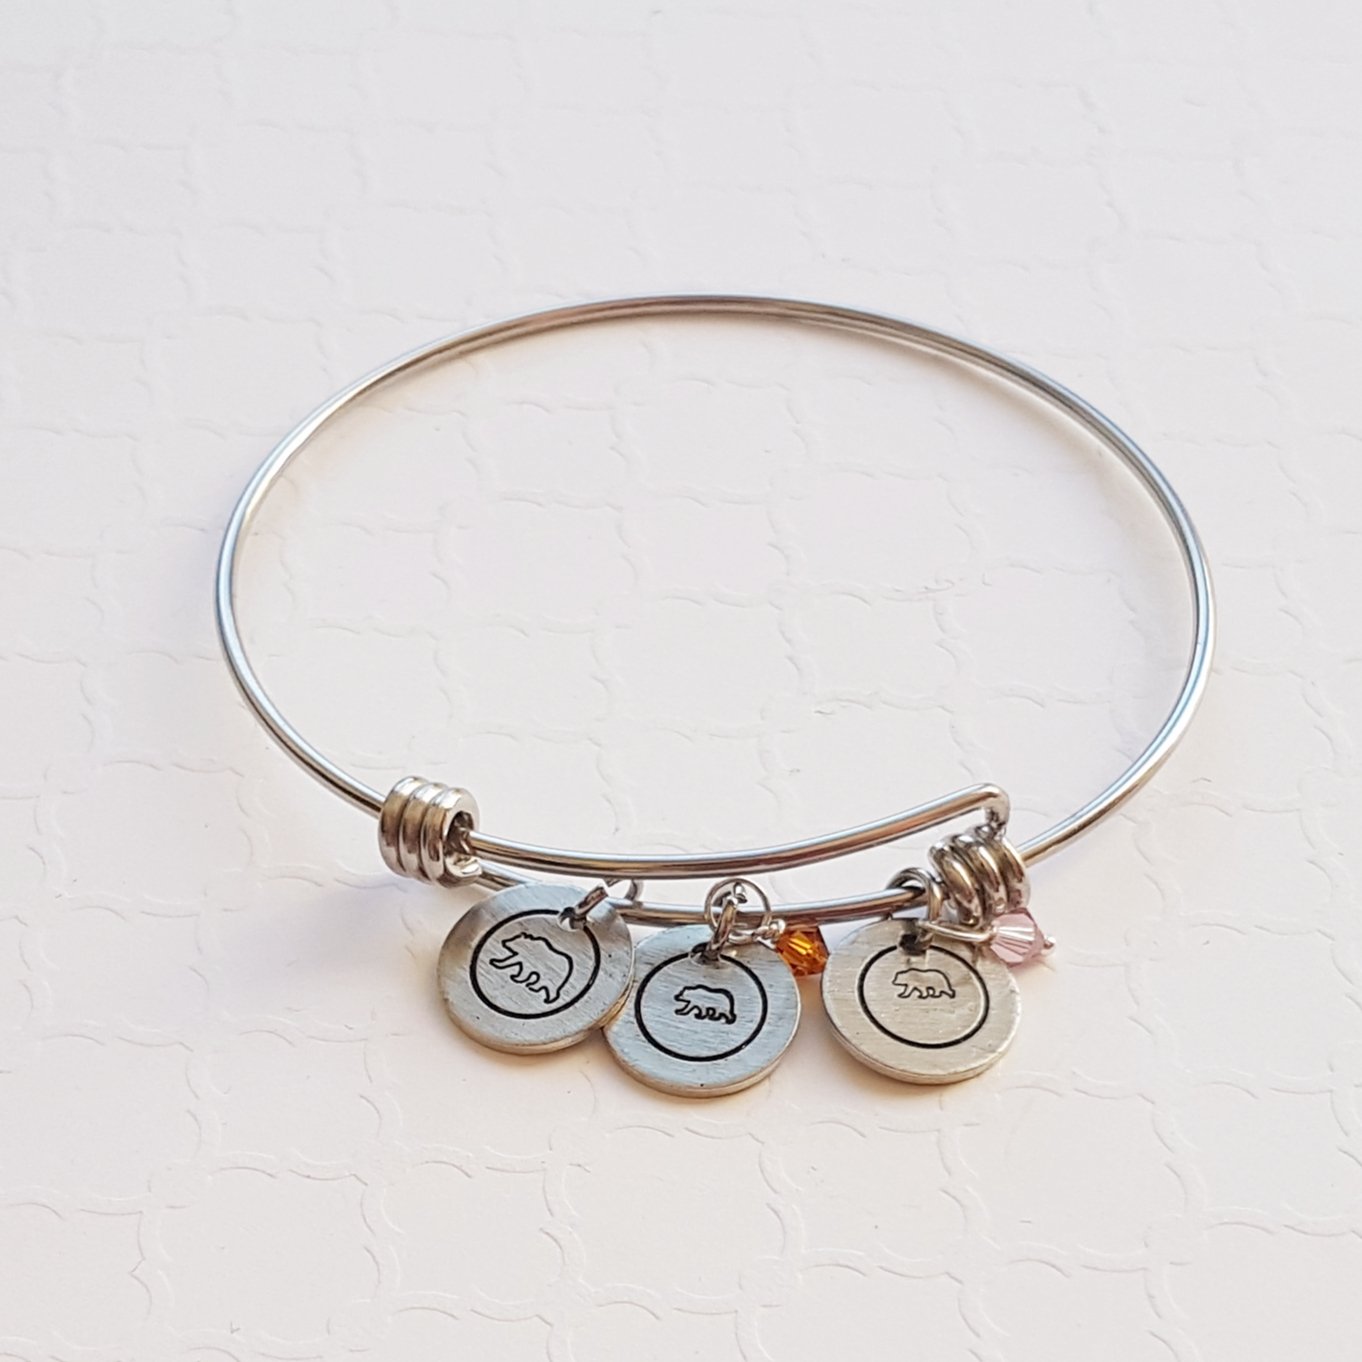 bangle bracelet with mama and baby bear charms and birthstones